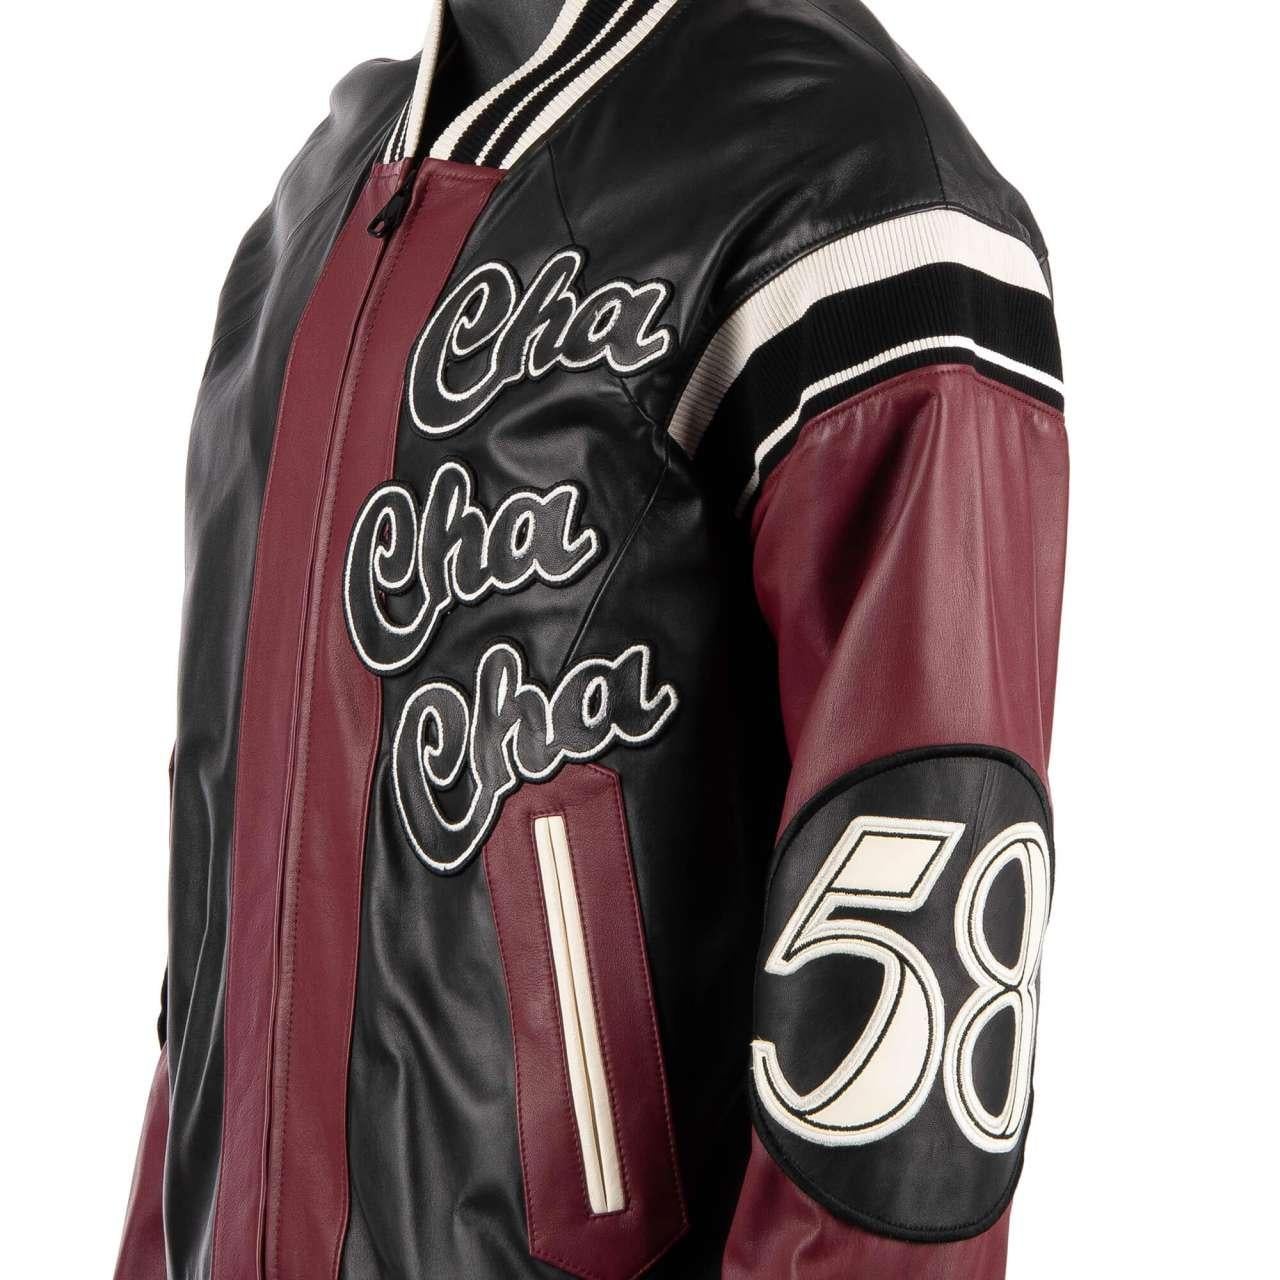 D&G Club Lounge Cello Embroidered Bomber Leather Jacket Black Bordeaux 46 For Sale 2